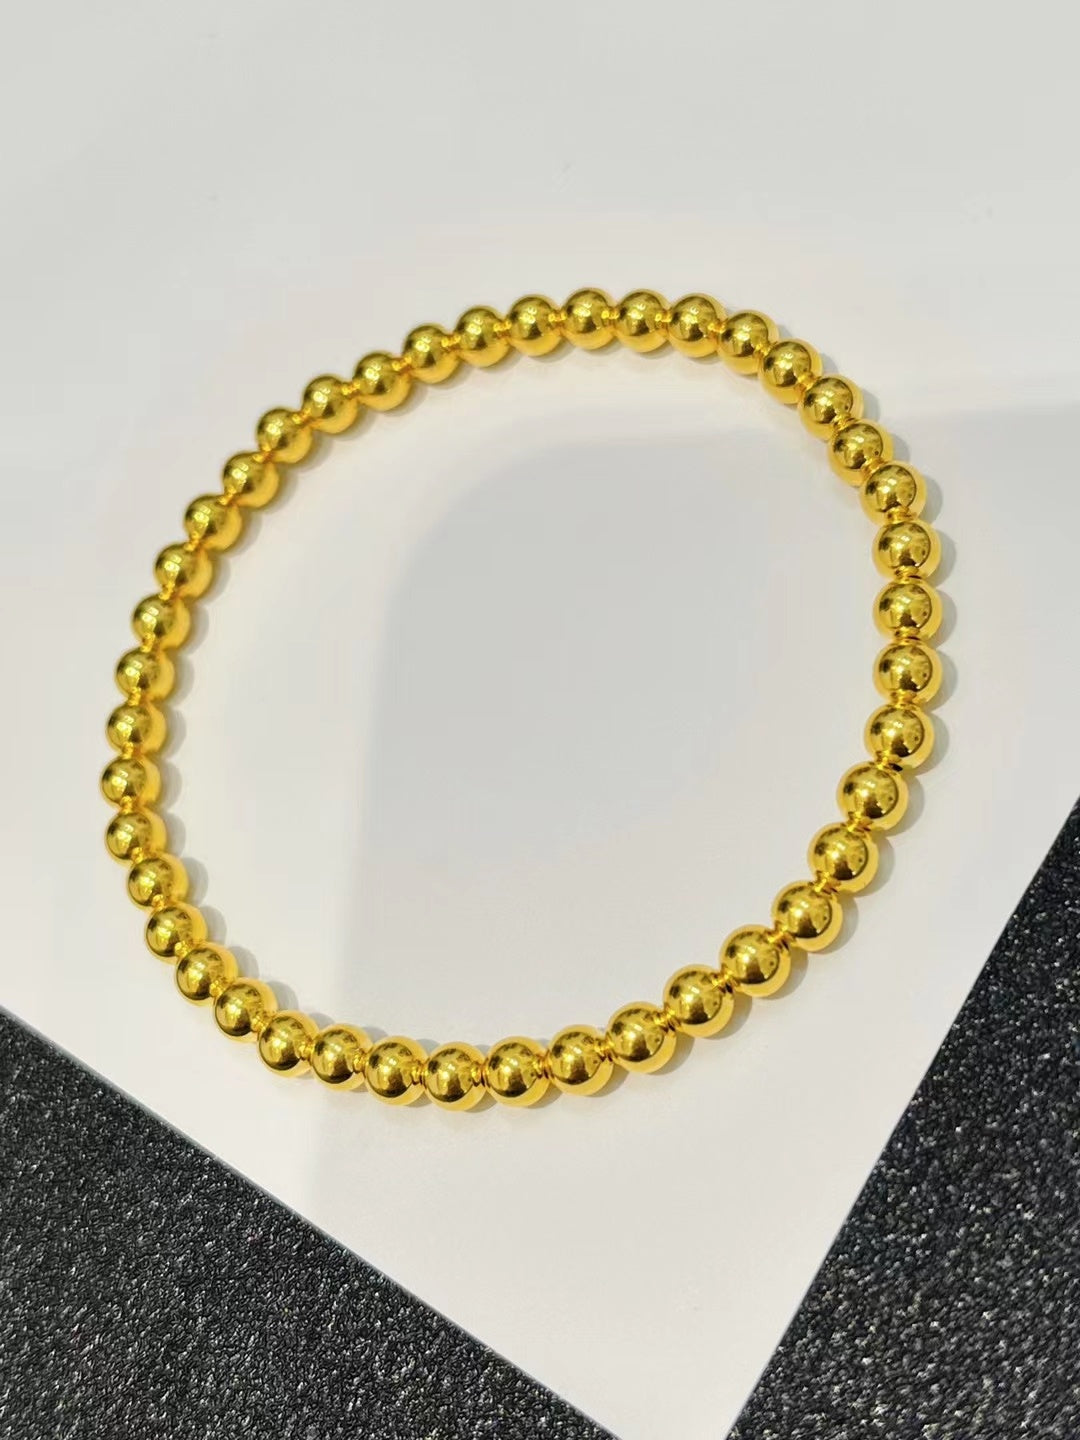 Bead Bead Hand String 999 Full Gold Material 5D Cyanide Free